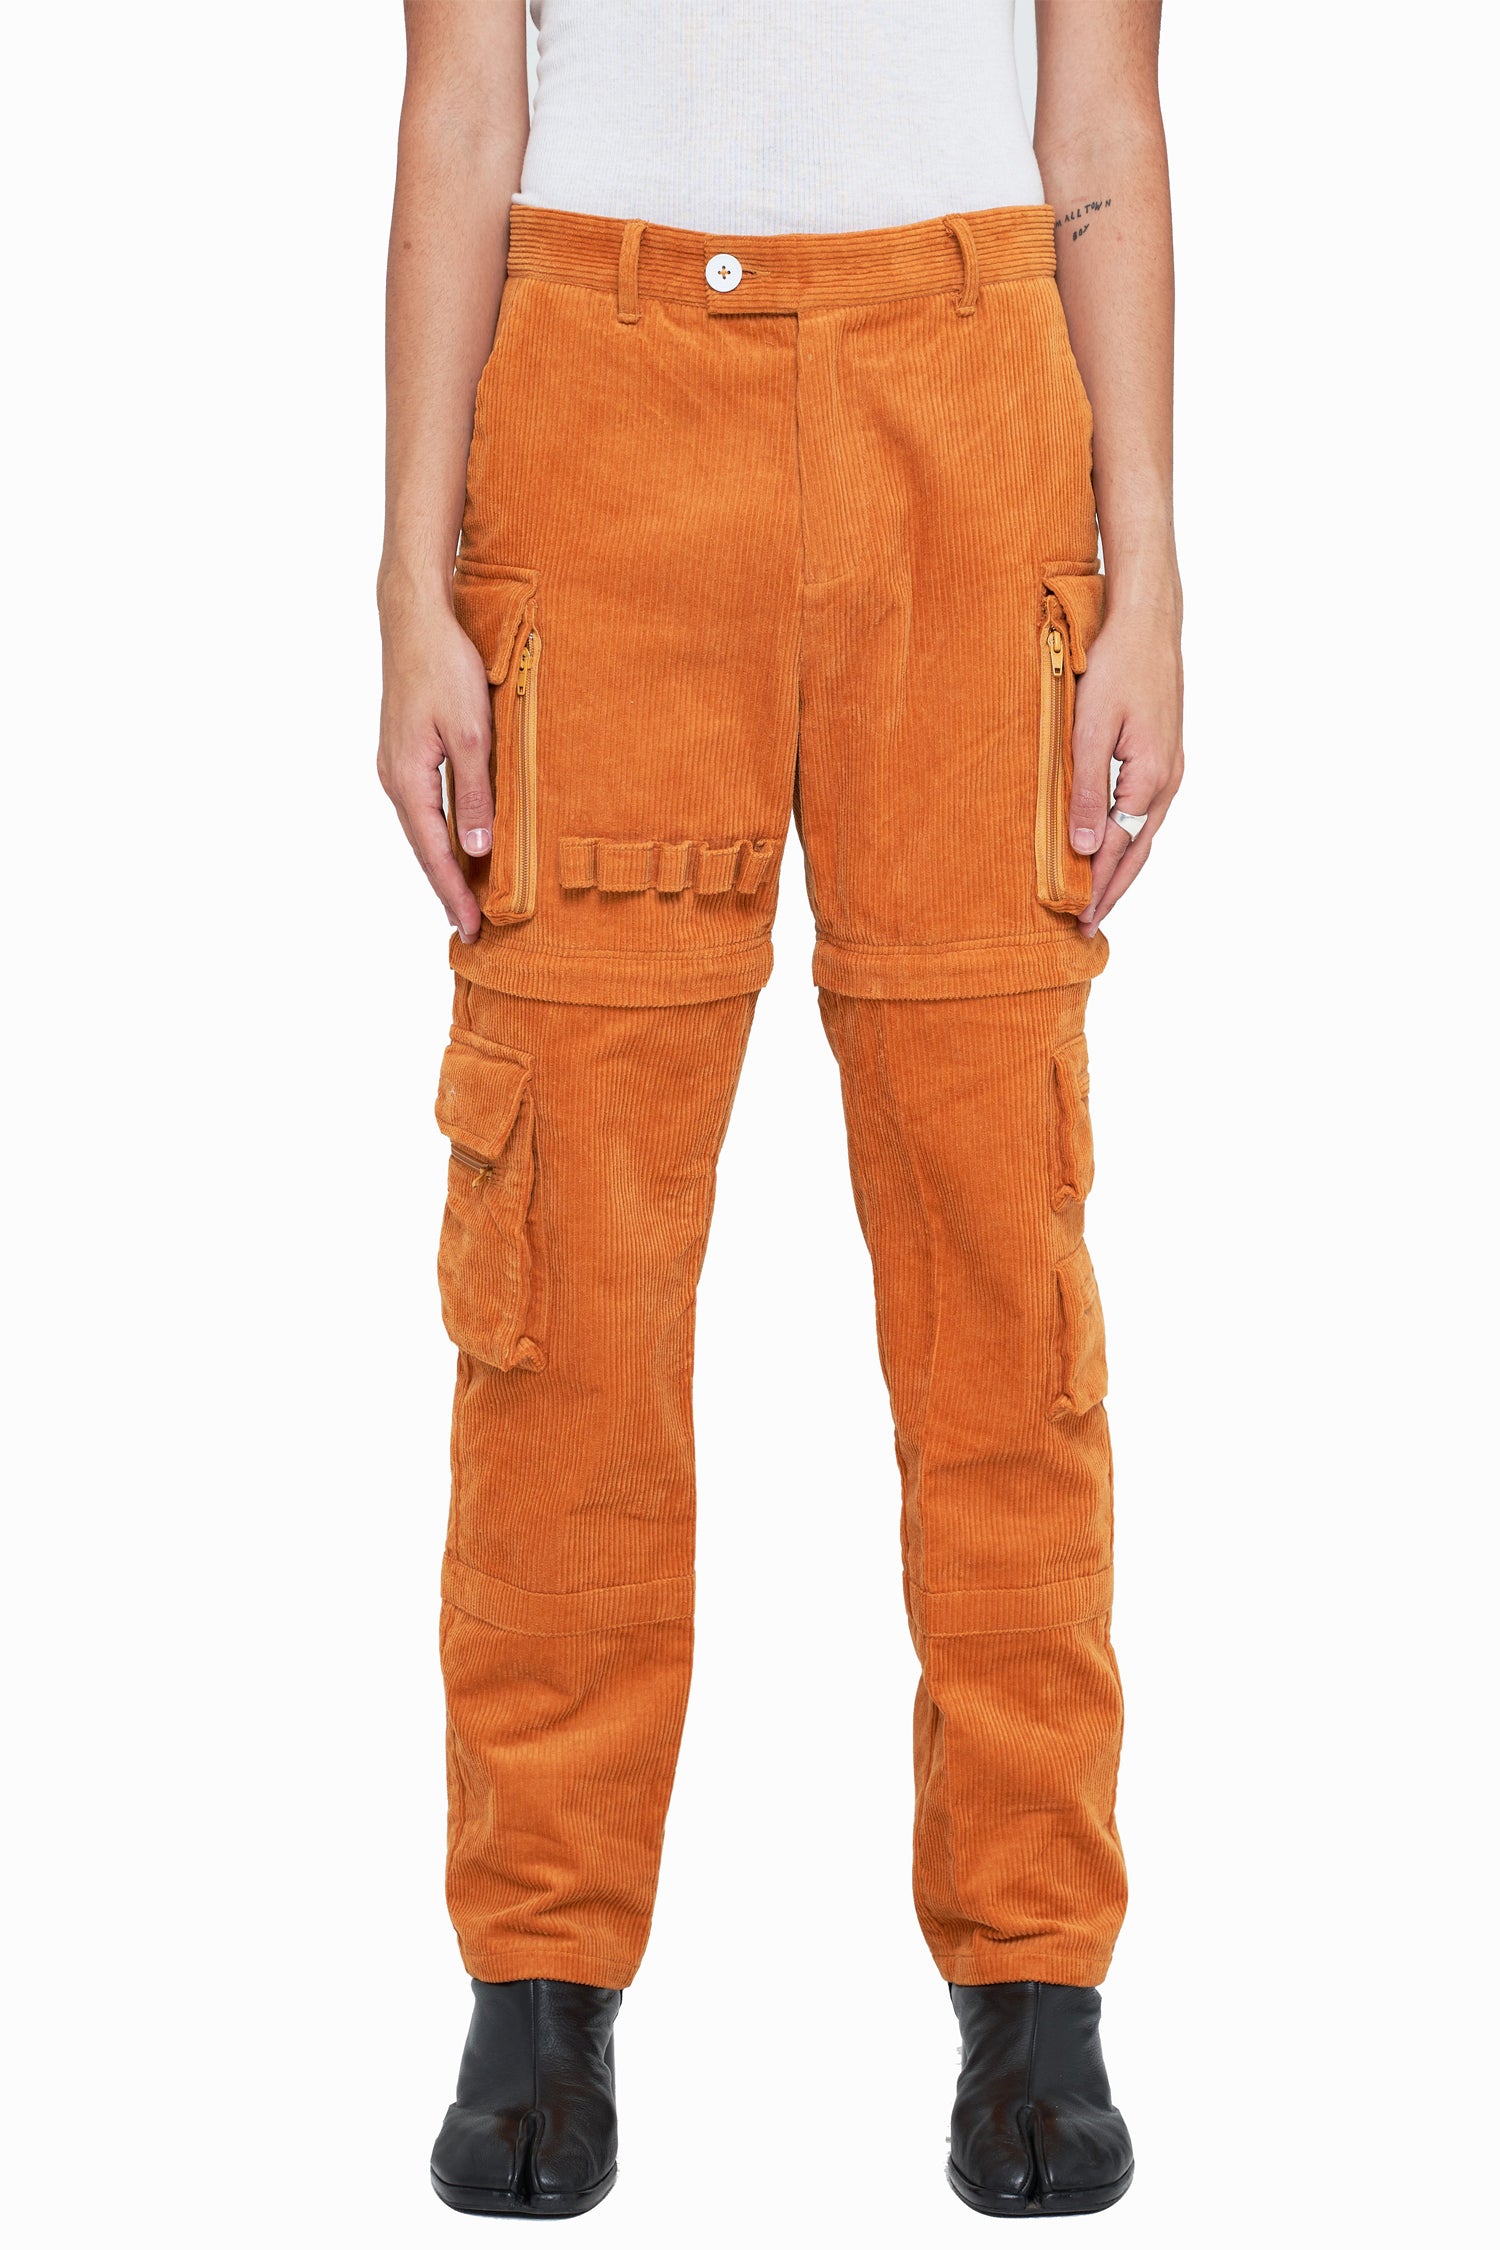 Upgraded with an improved corduroy fabric in apricot brown and better sizing. These pants are adaptable for year-round wear, these utility pants are built from a functional corduroy fabric with fair stretch. Its construction is secured with stitched panels and it's made with plenty of utilitarian appeal with multiple pockets. These trousers are competent for any season as it's zipper-adjustable and can be transformed into a pair of shorts when the temperature rises.